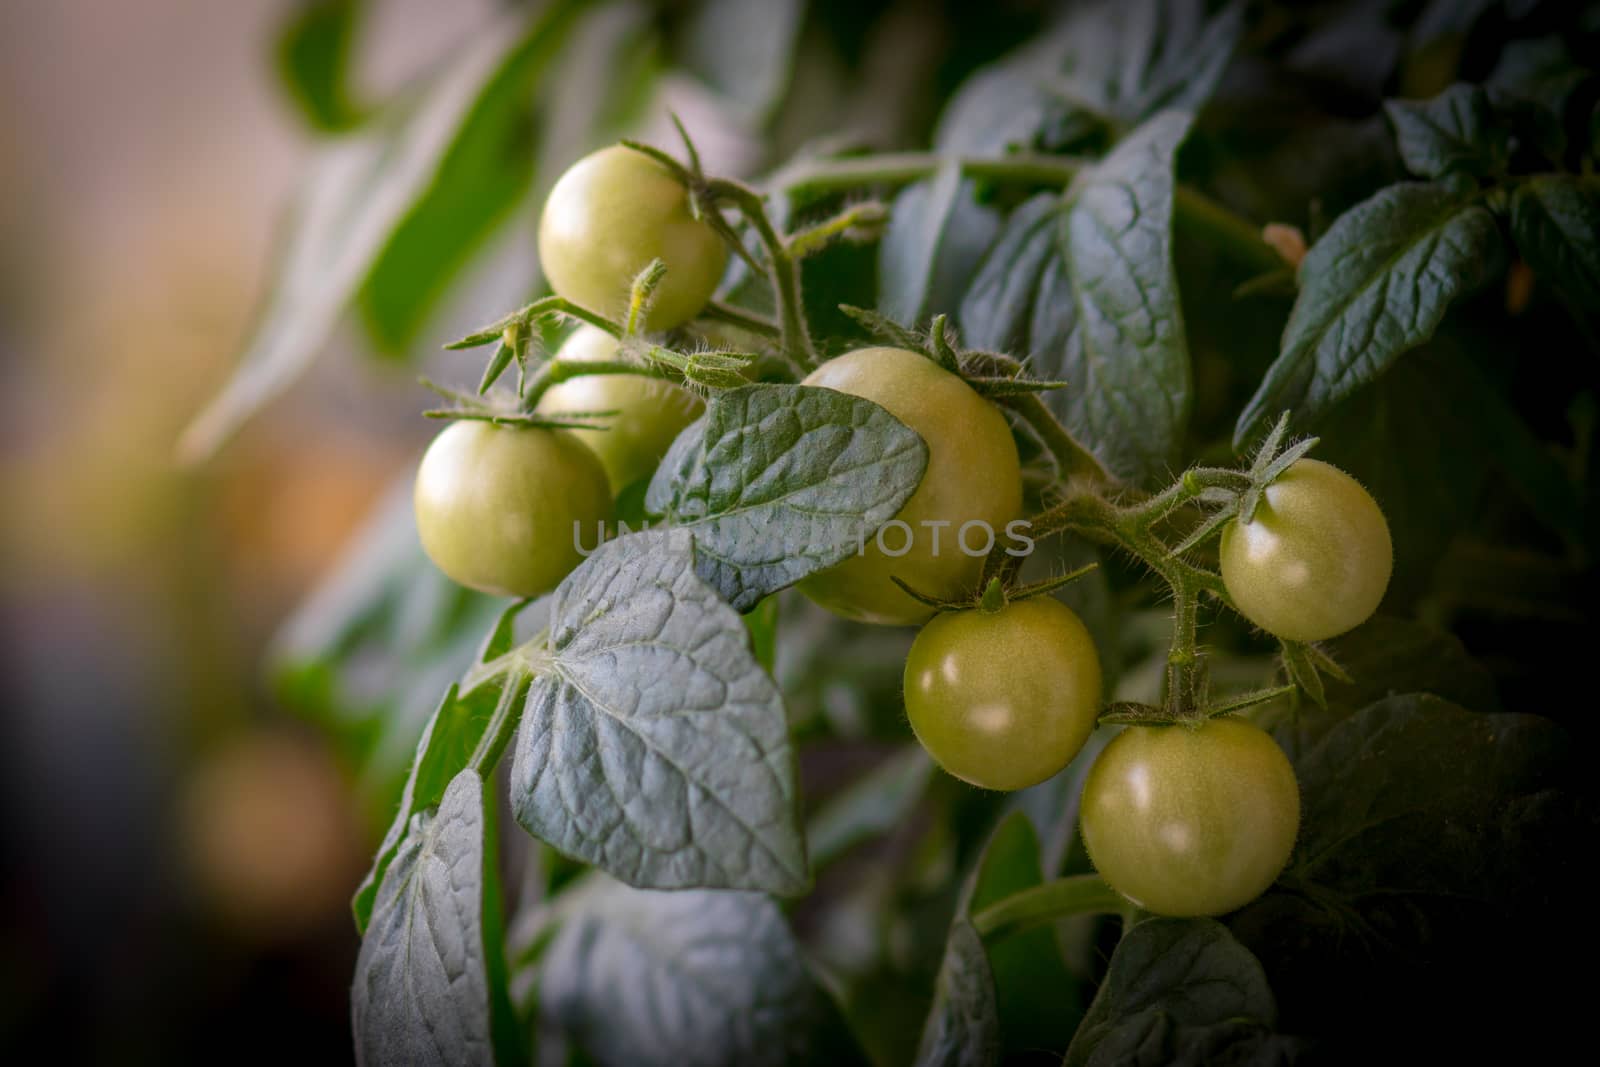 A bush with green unripe tomatoes. Greenhouse tomatoes. by Yurii73